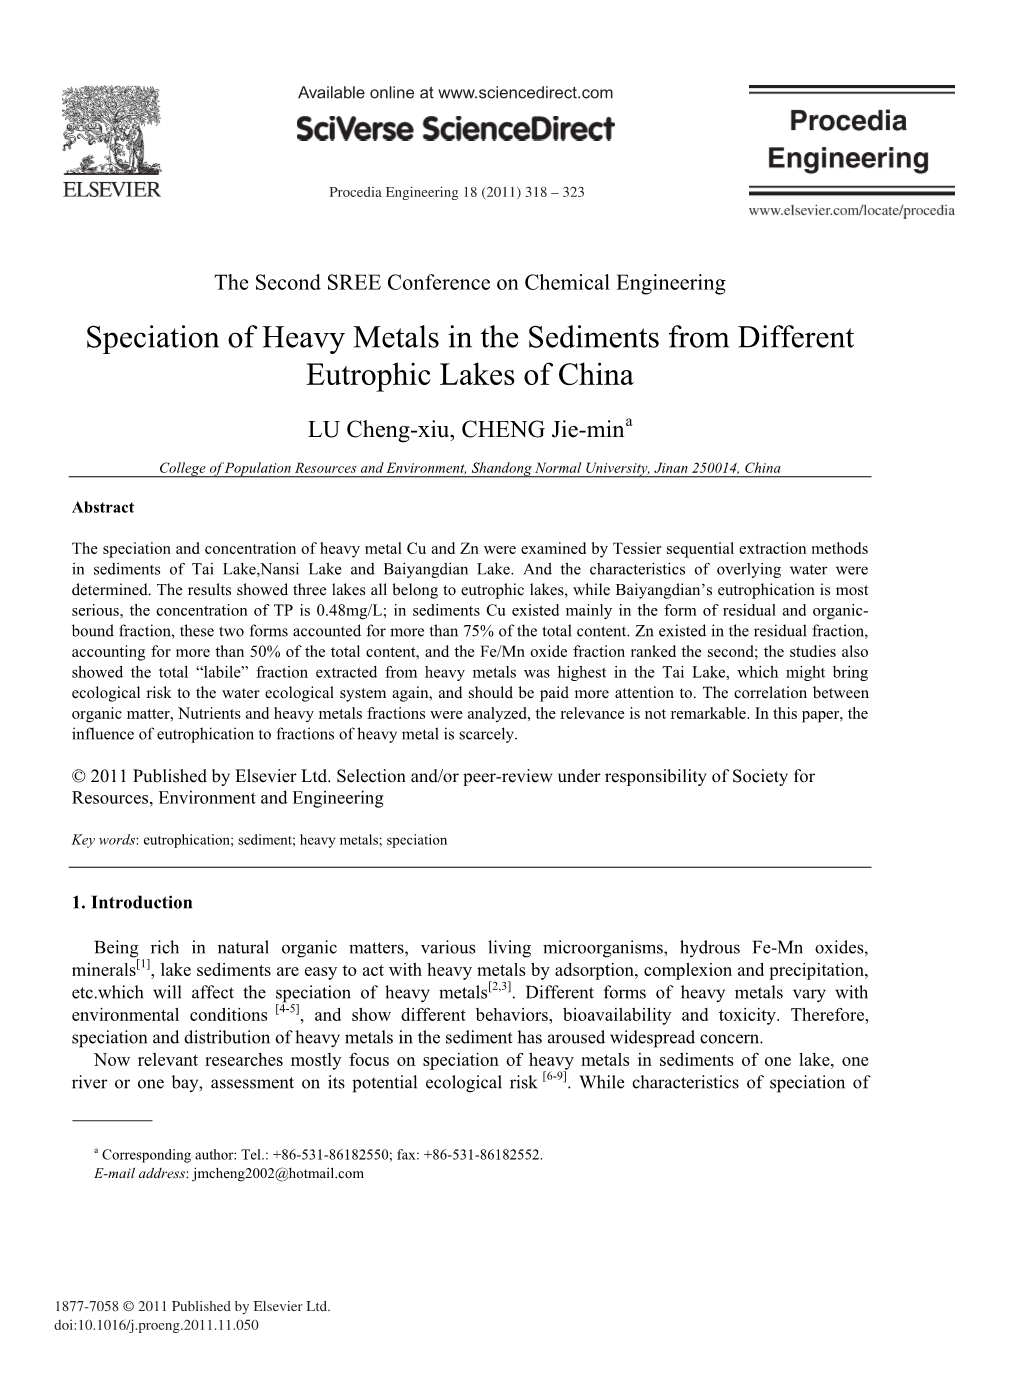 Speciation of Heavy Metals in the Sediments from Different Eutrophic Lakes of China